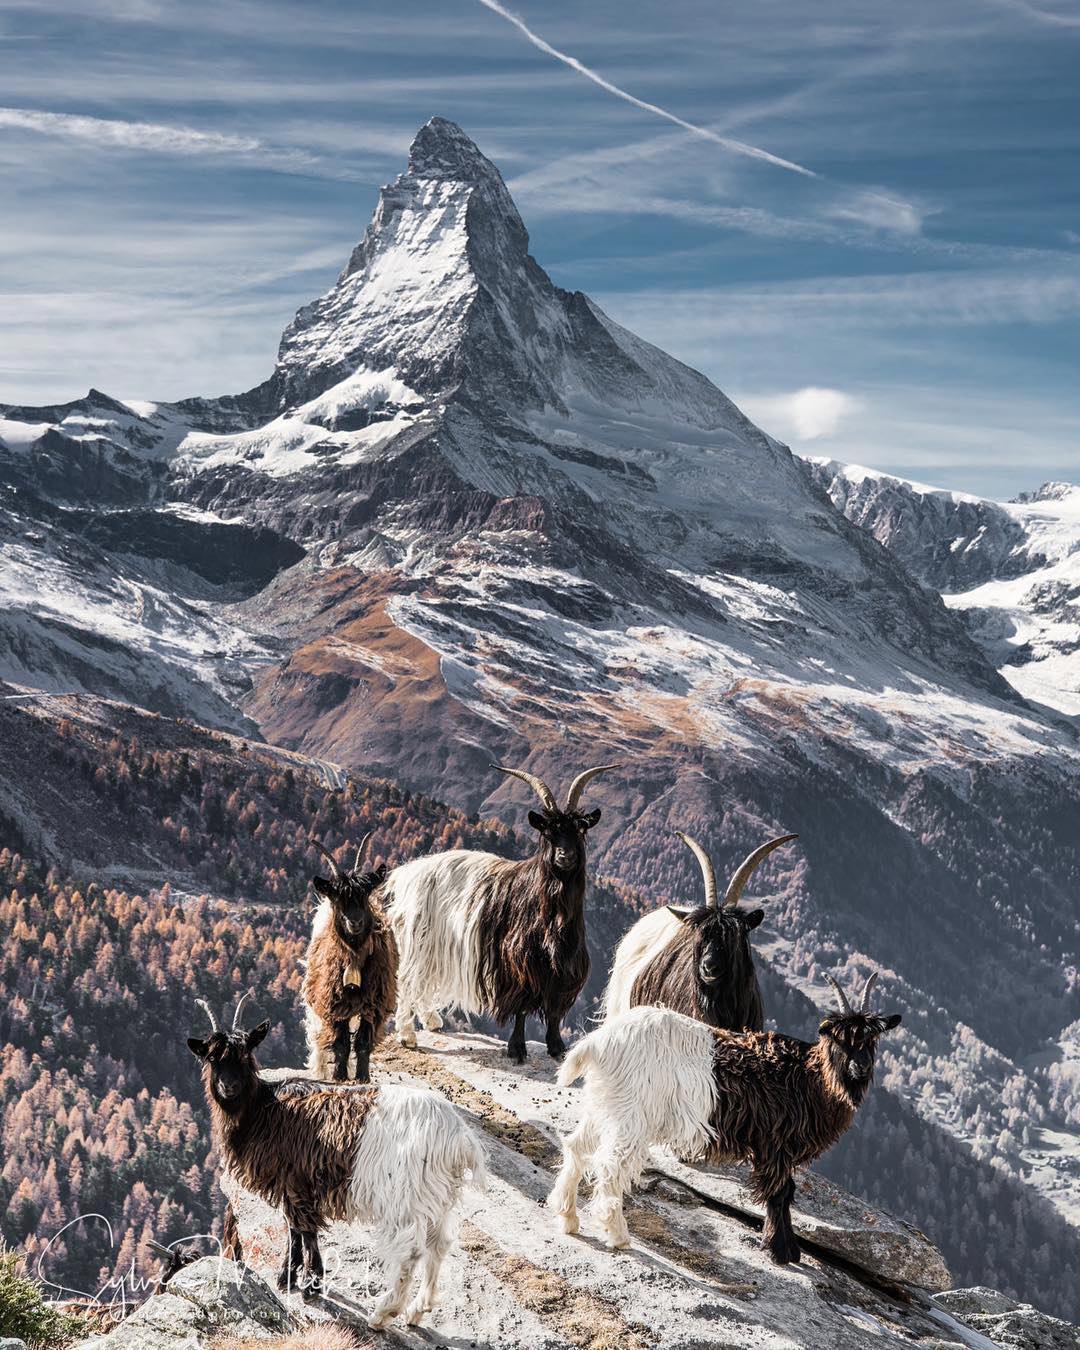 A picture of the Matterhorn with some goats.Zermatt is a top destination that should be in your bucket list. A gas explosion has taken place Friday at the Grand Hotel Zermatterhof.